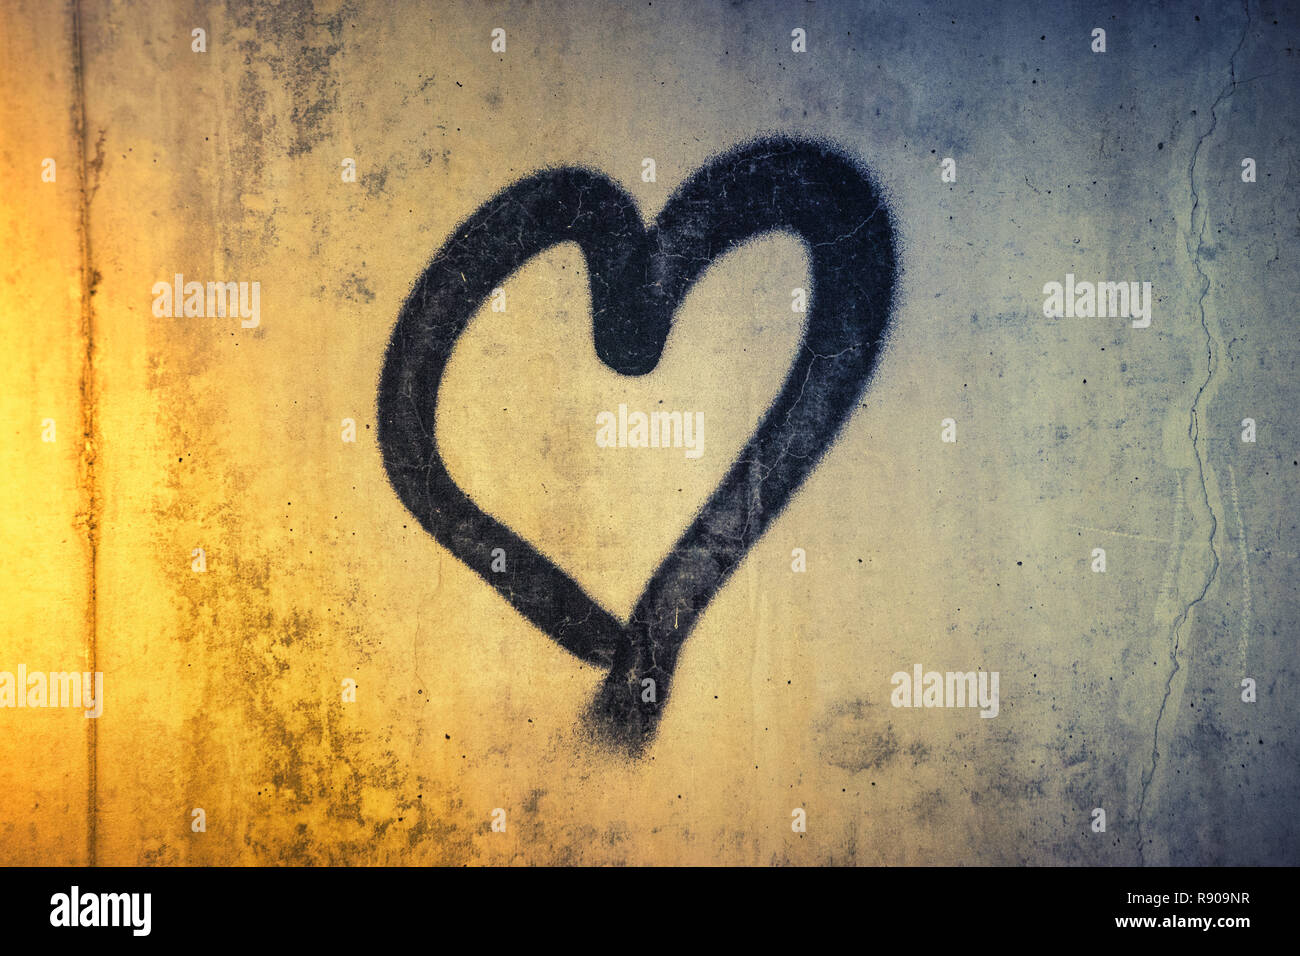 Drawn heart on a stone background Stock Photo